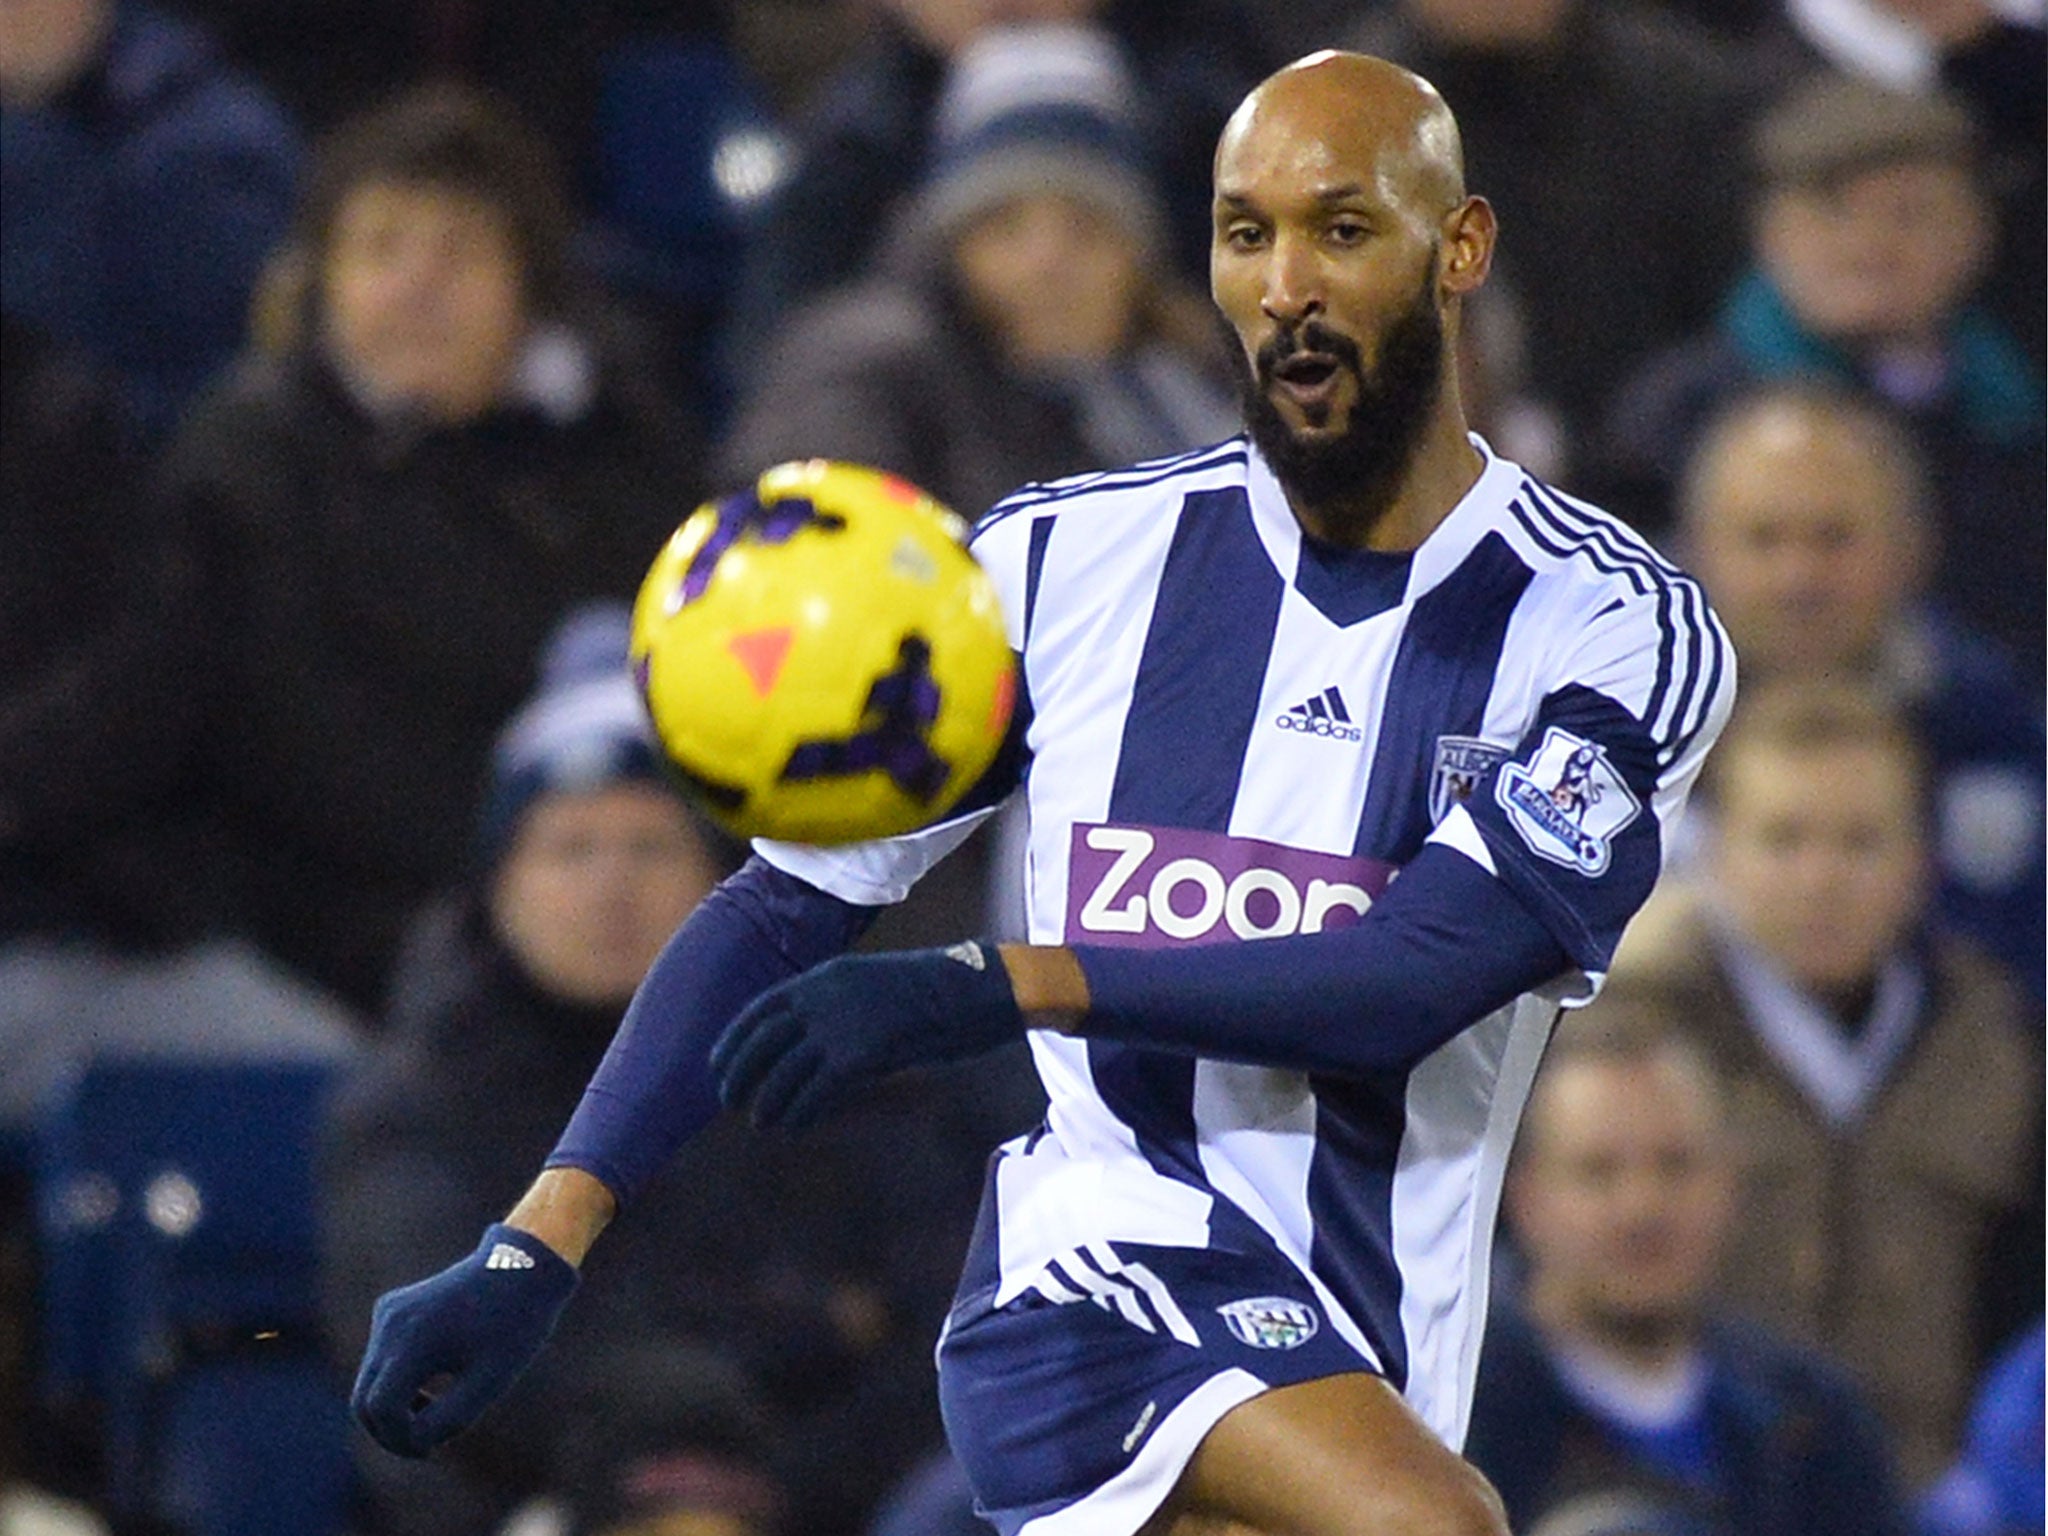 Nicolas Anelka in action for West Brom during the 1-1 draw with Everton